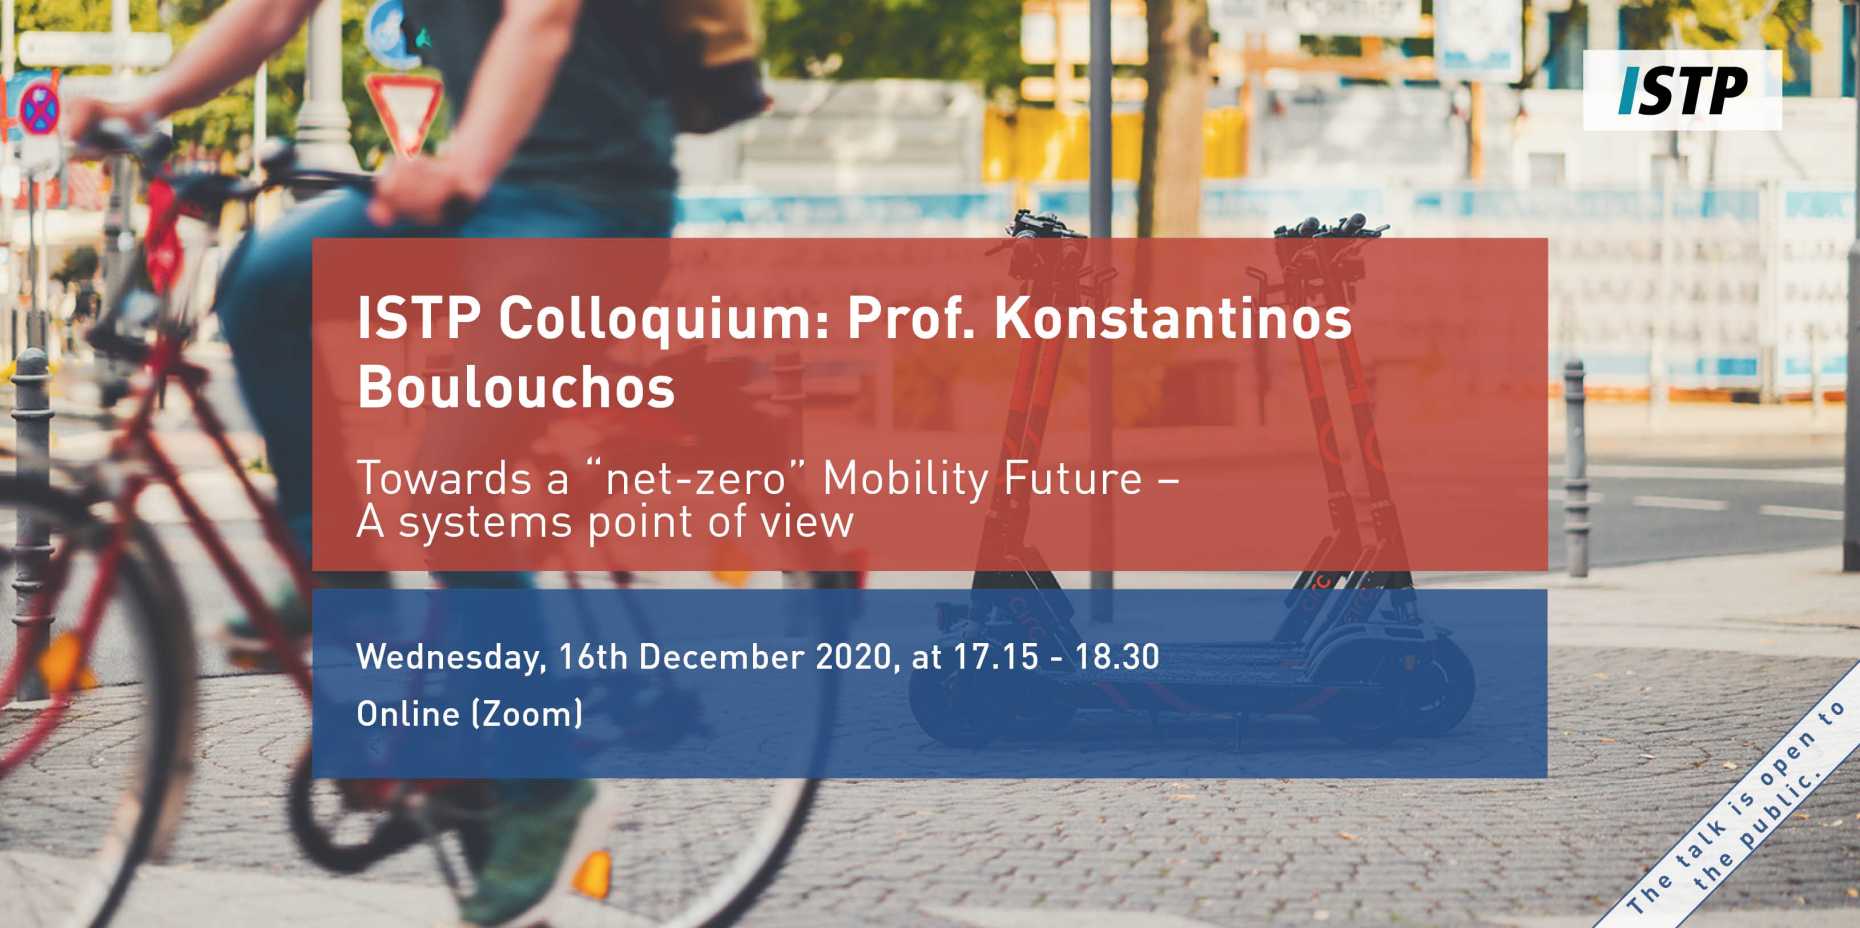 Enlarged view: ISTP Colloquium: Towards a "net-zero" Mobility Future – A systems point of view